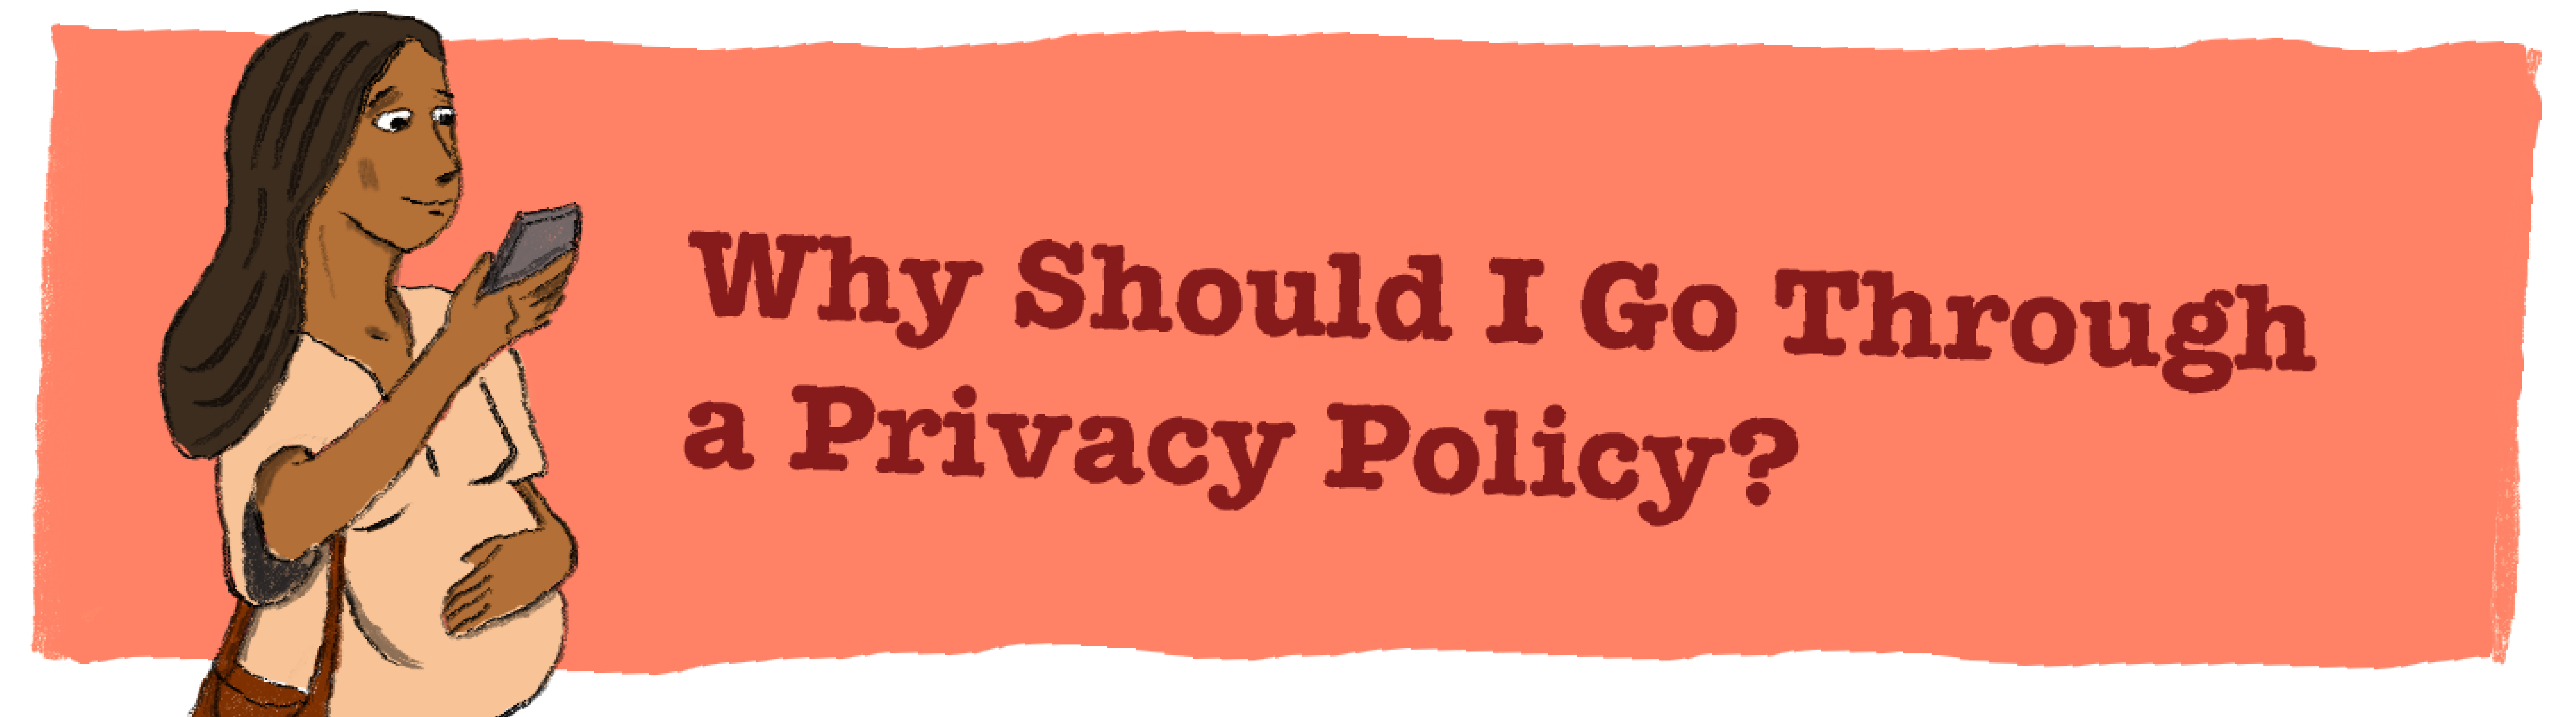 Why should I go through a privacy policy?